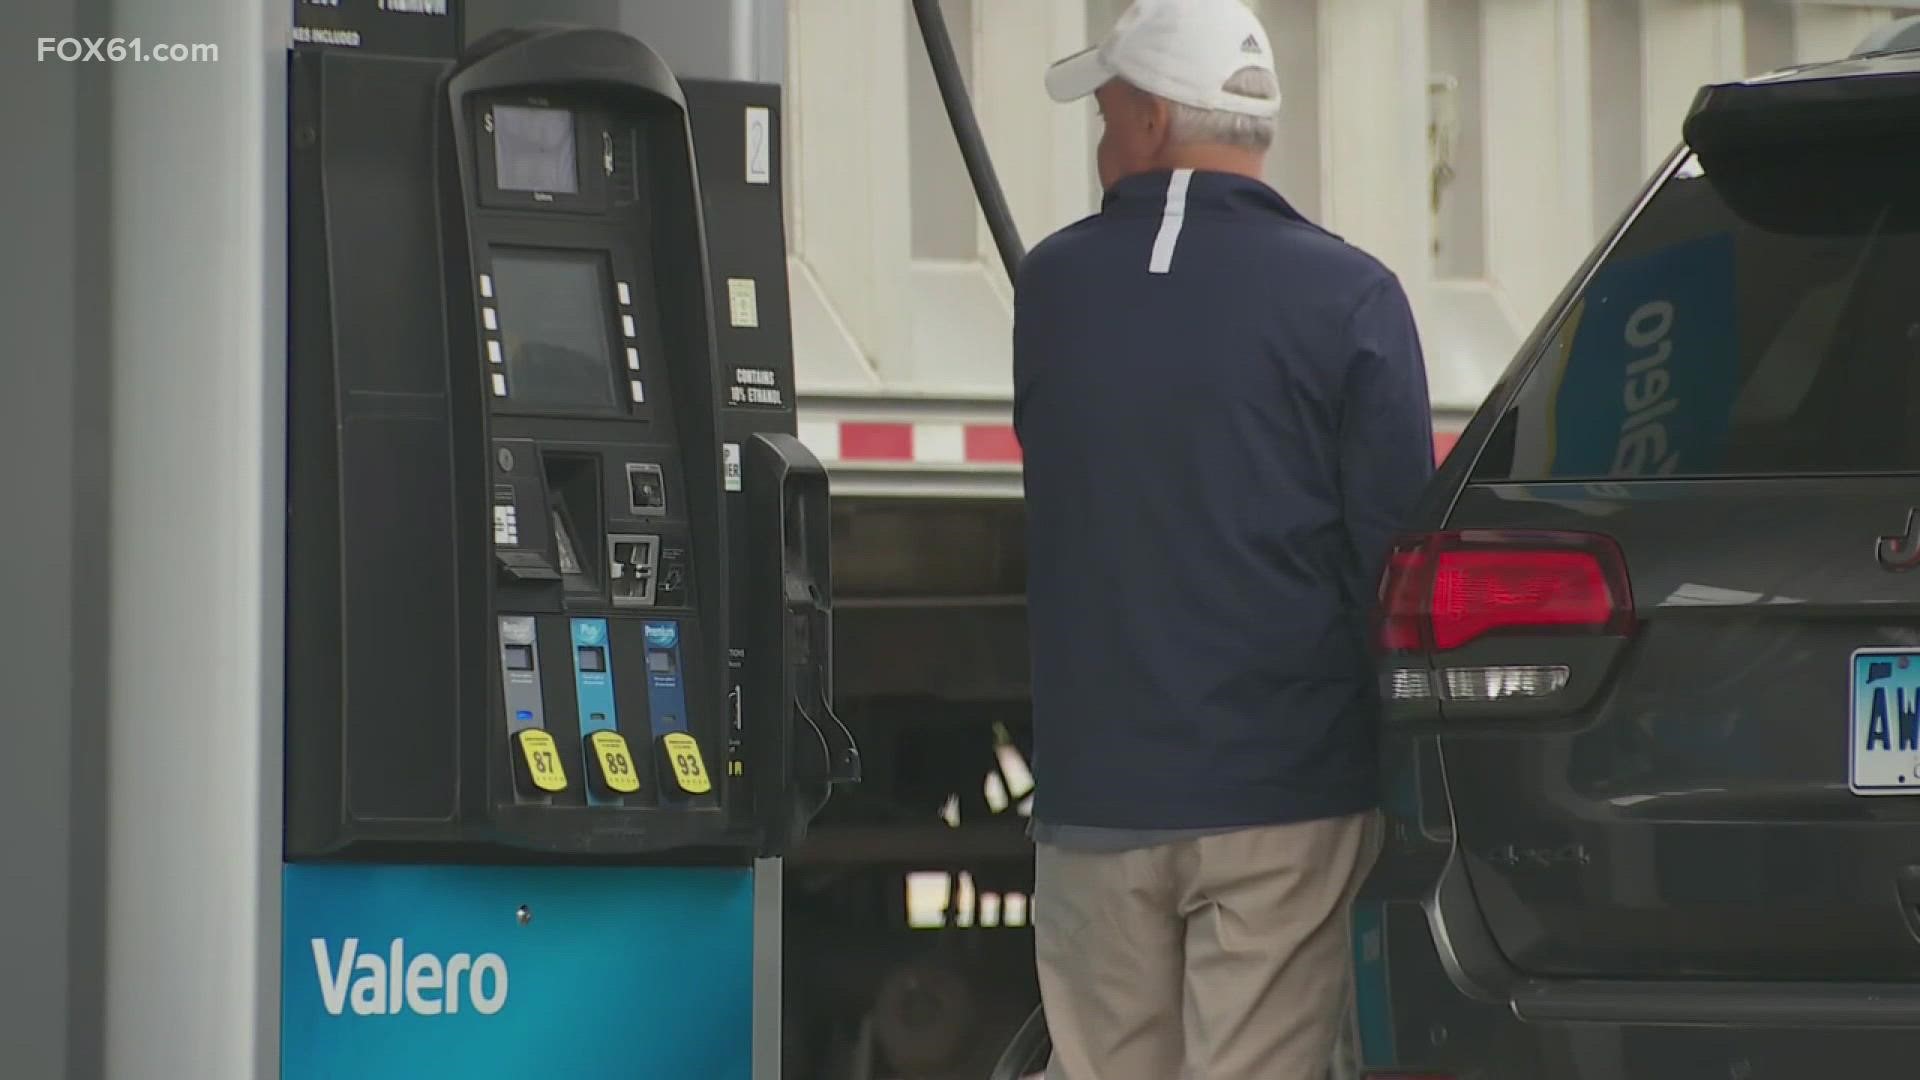 The record gas price is now $4.92. Gas prices continue to climb, now people are doing what they can to save.